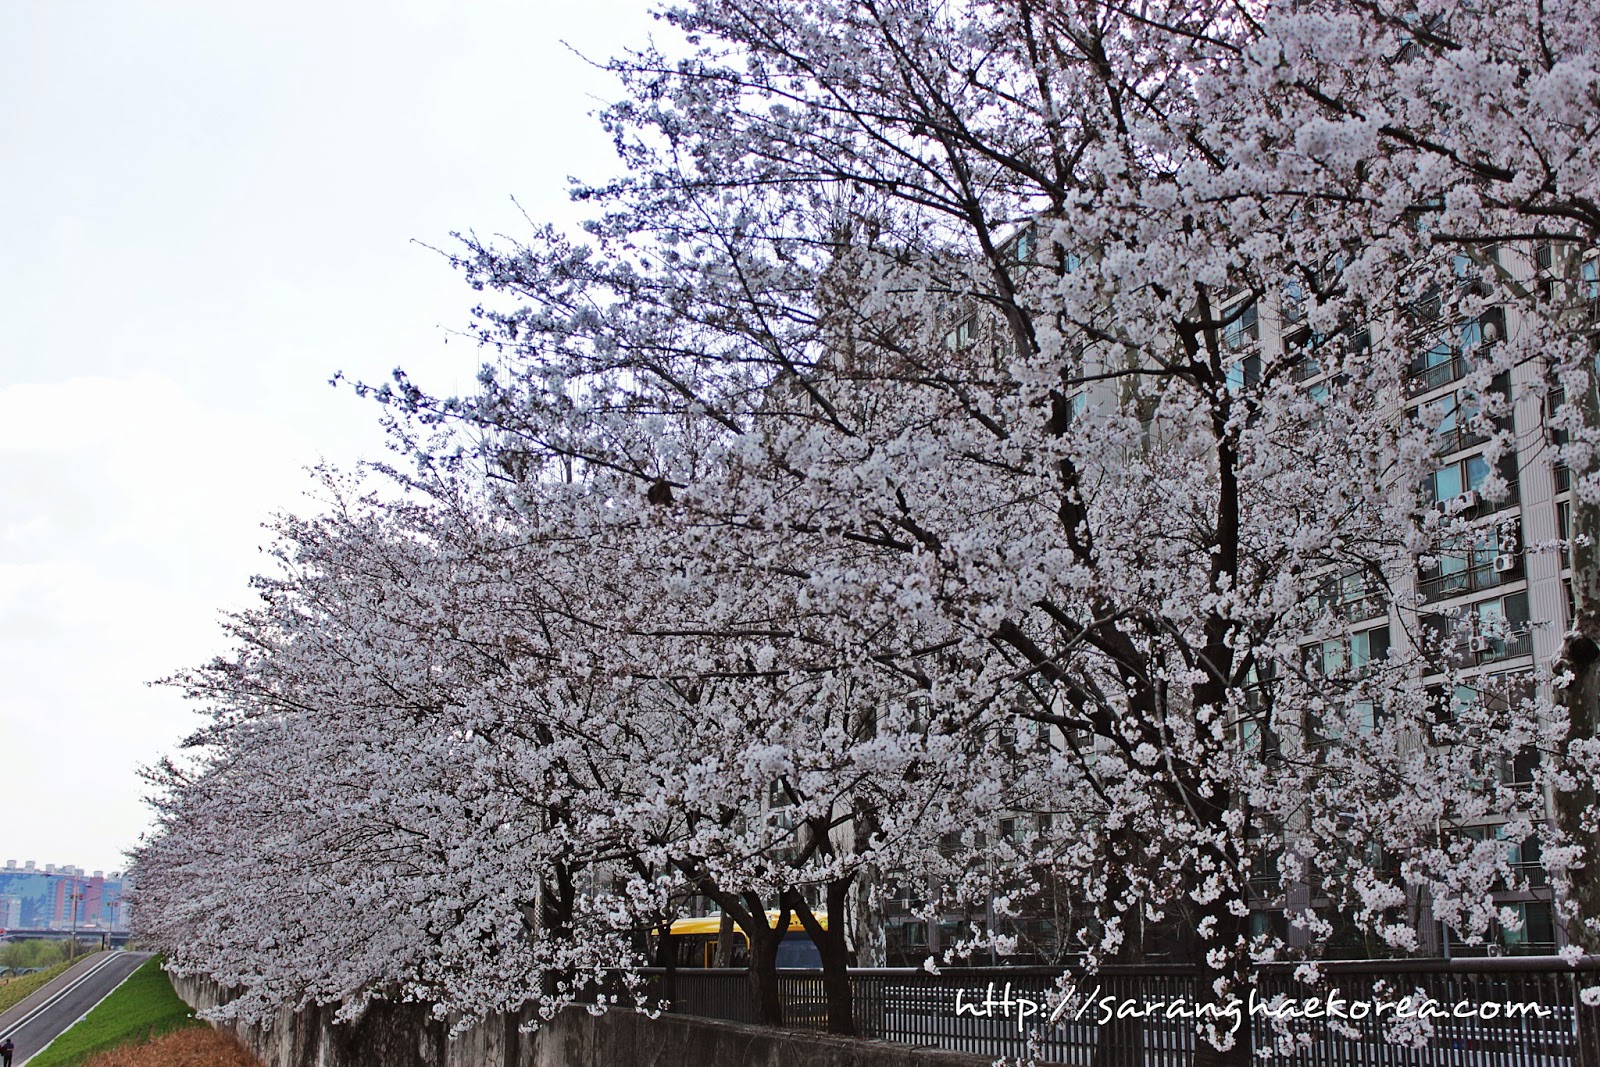 Korea Welcomes Spring with Cherry Blossoms